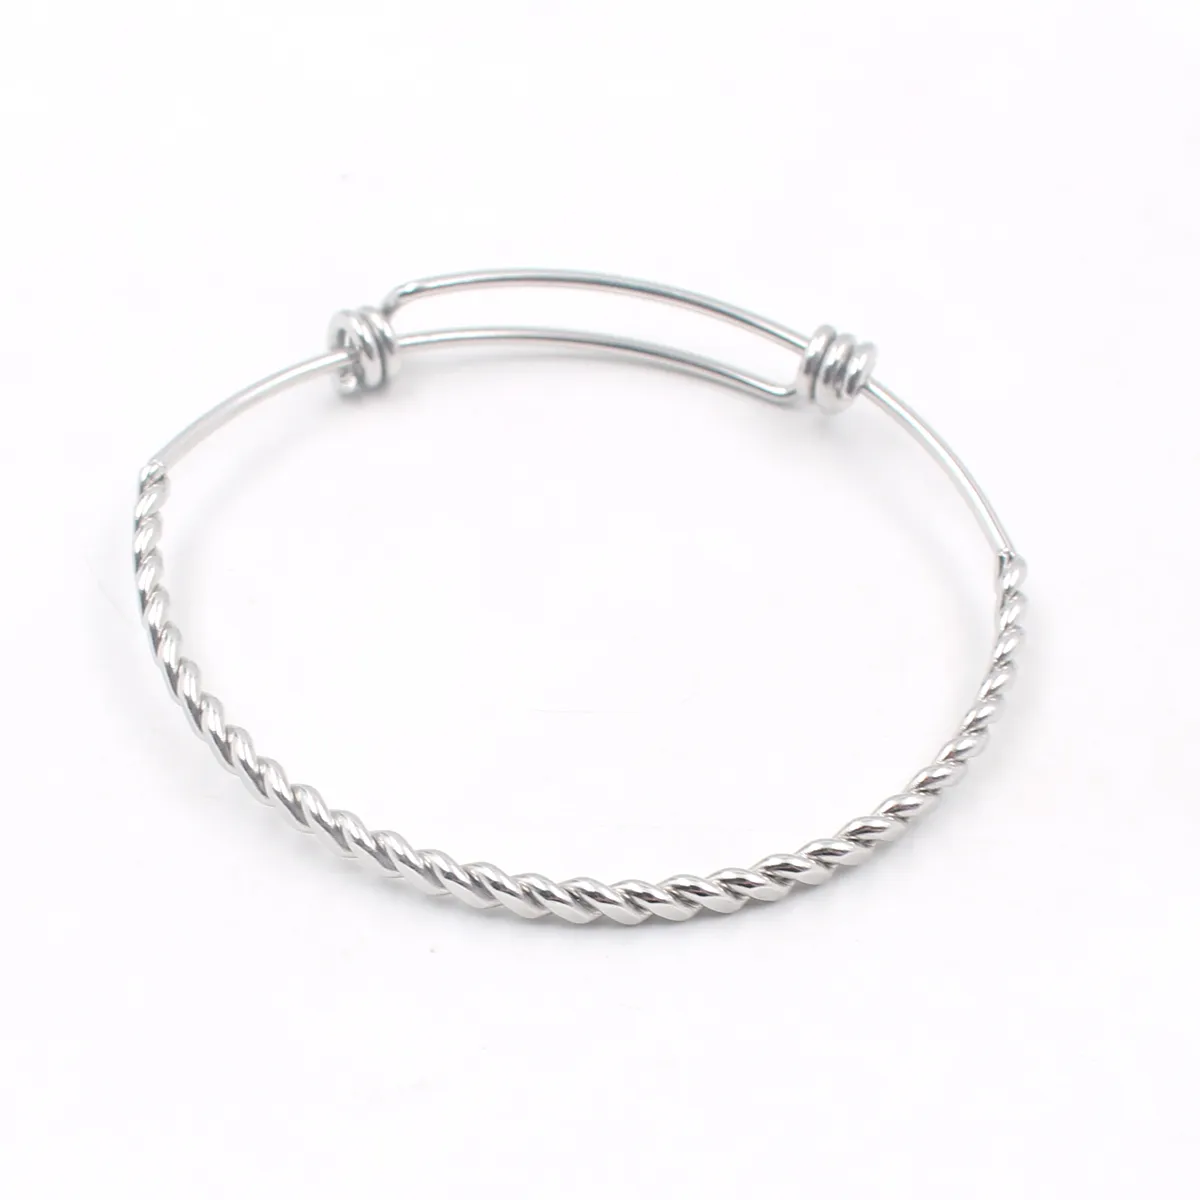 Adjustable Bangle Bracelet Thin 1.6mm THICK Expandable Bracelets, Bulk Stainless Steel Jewelry Making Supplies 65MM High quality